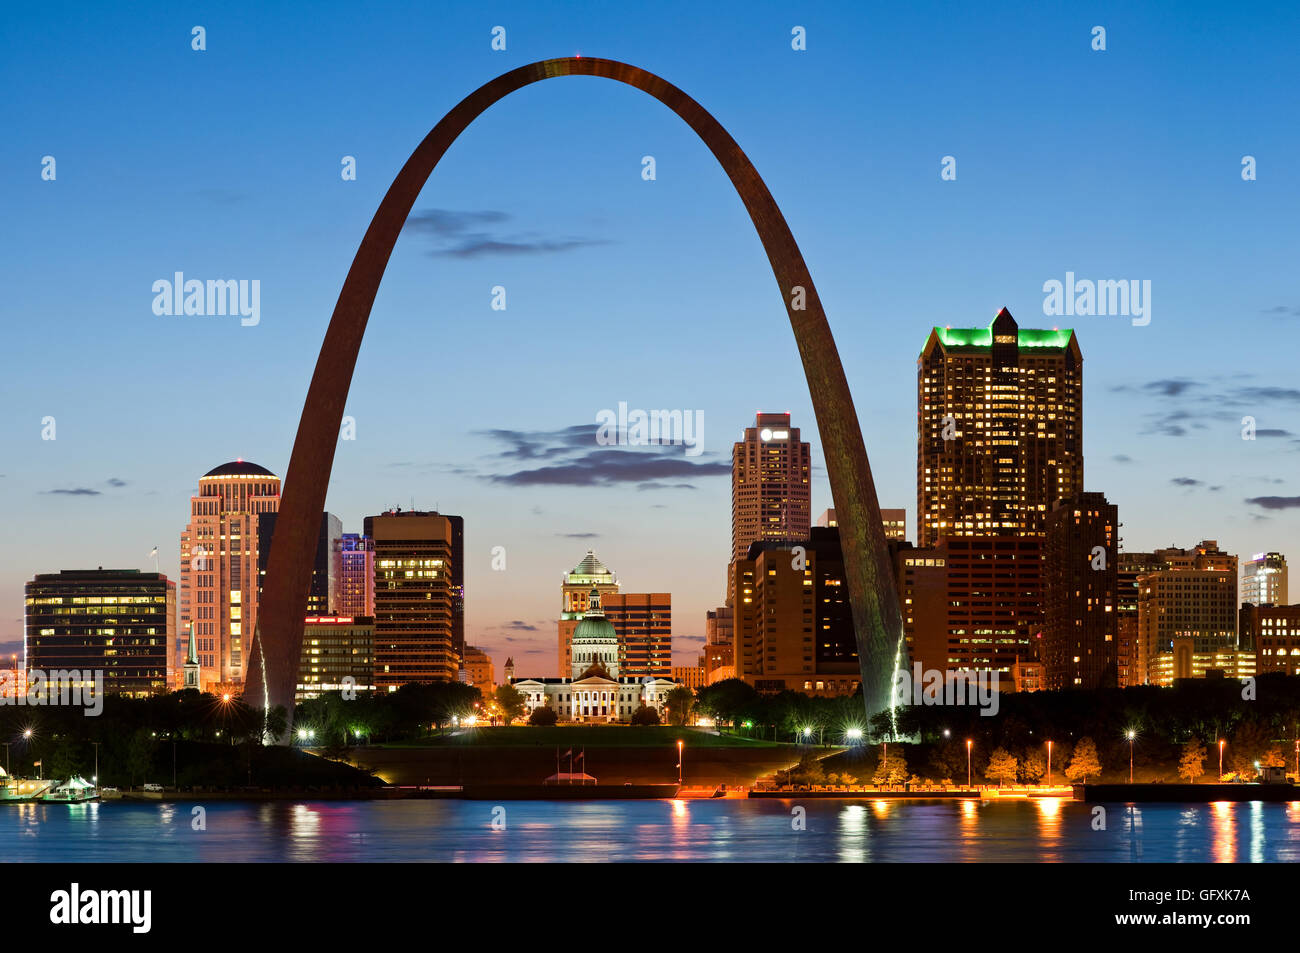 Skyline view of the Gateway Arch in St Louis, Missouri. Image of St. Louis downtown with Gateway Arch at twilight. Stock Photo